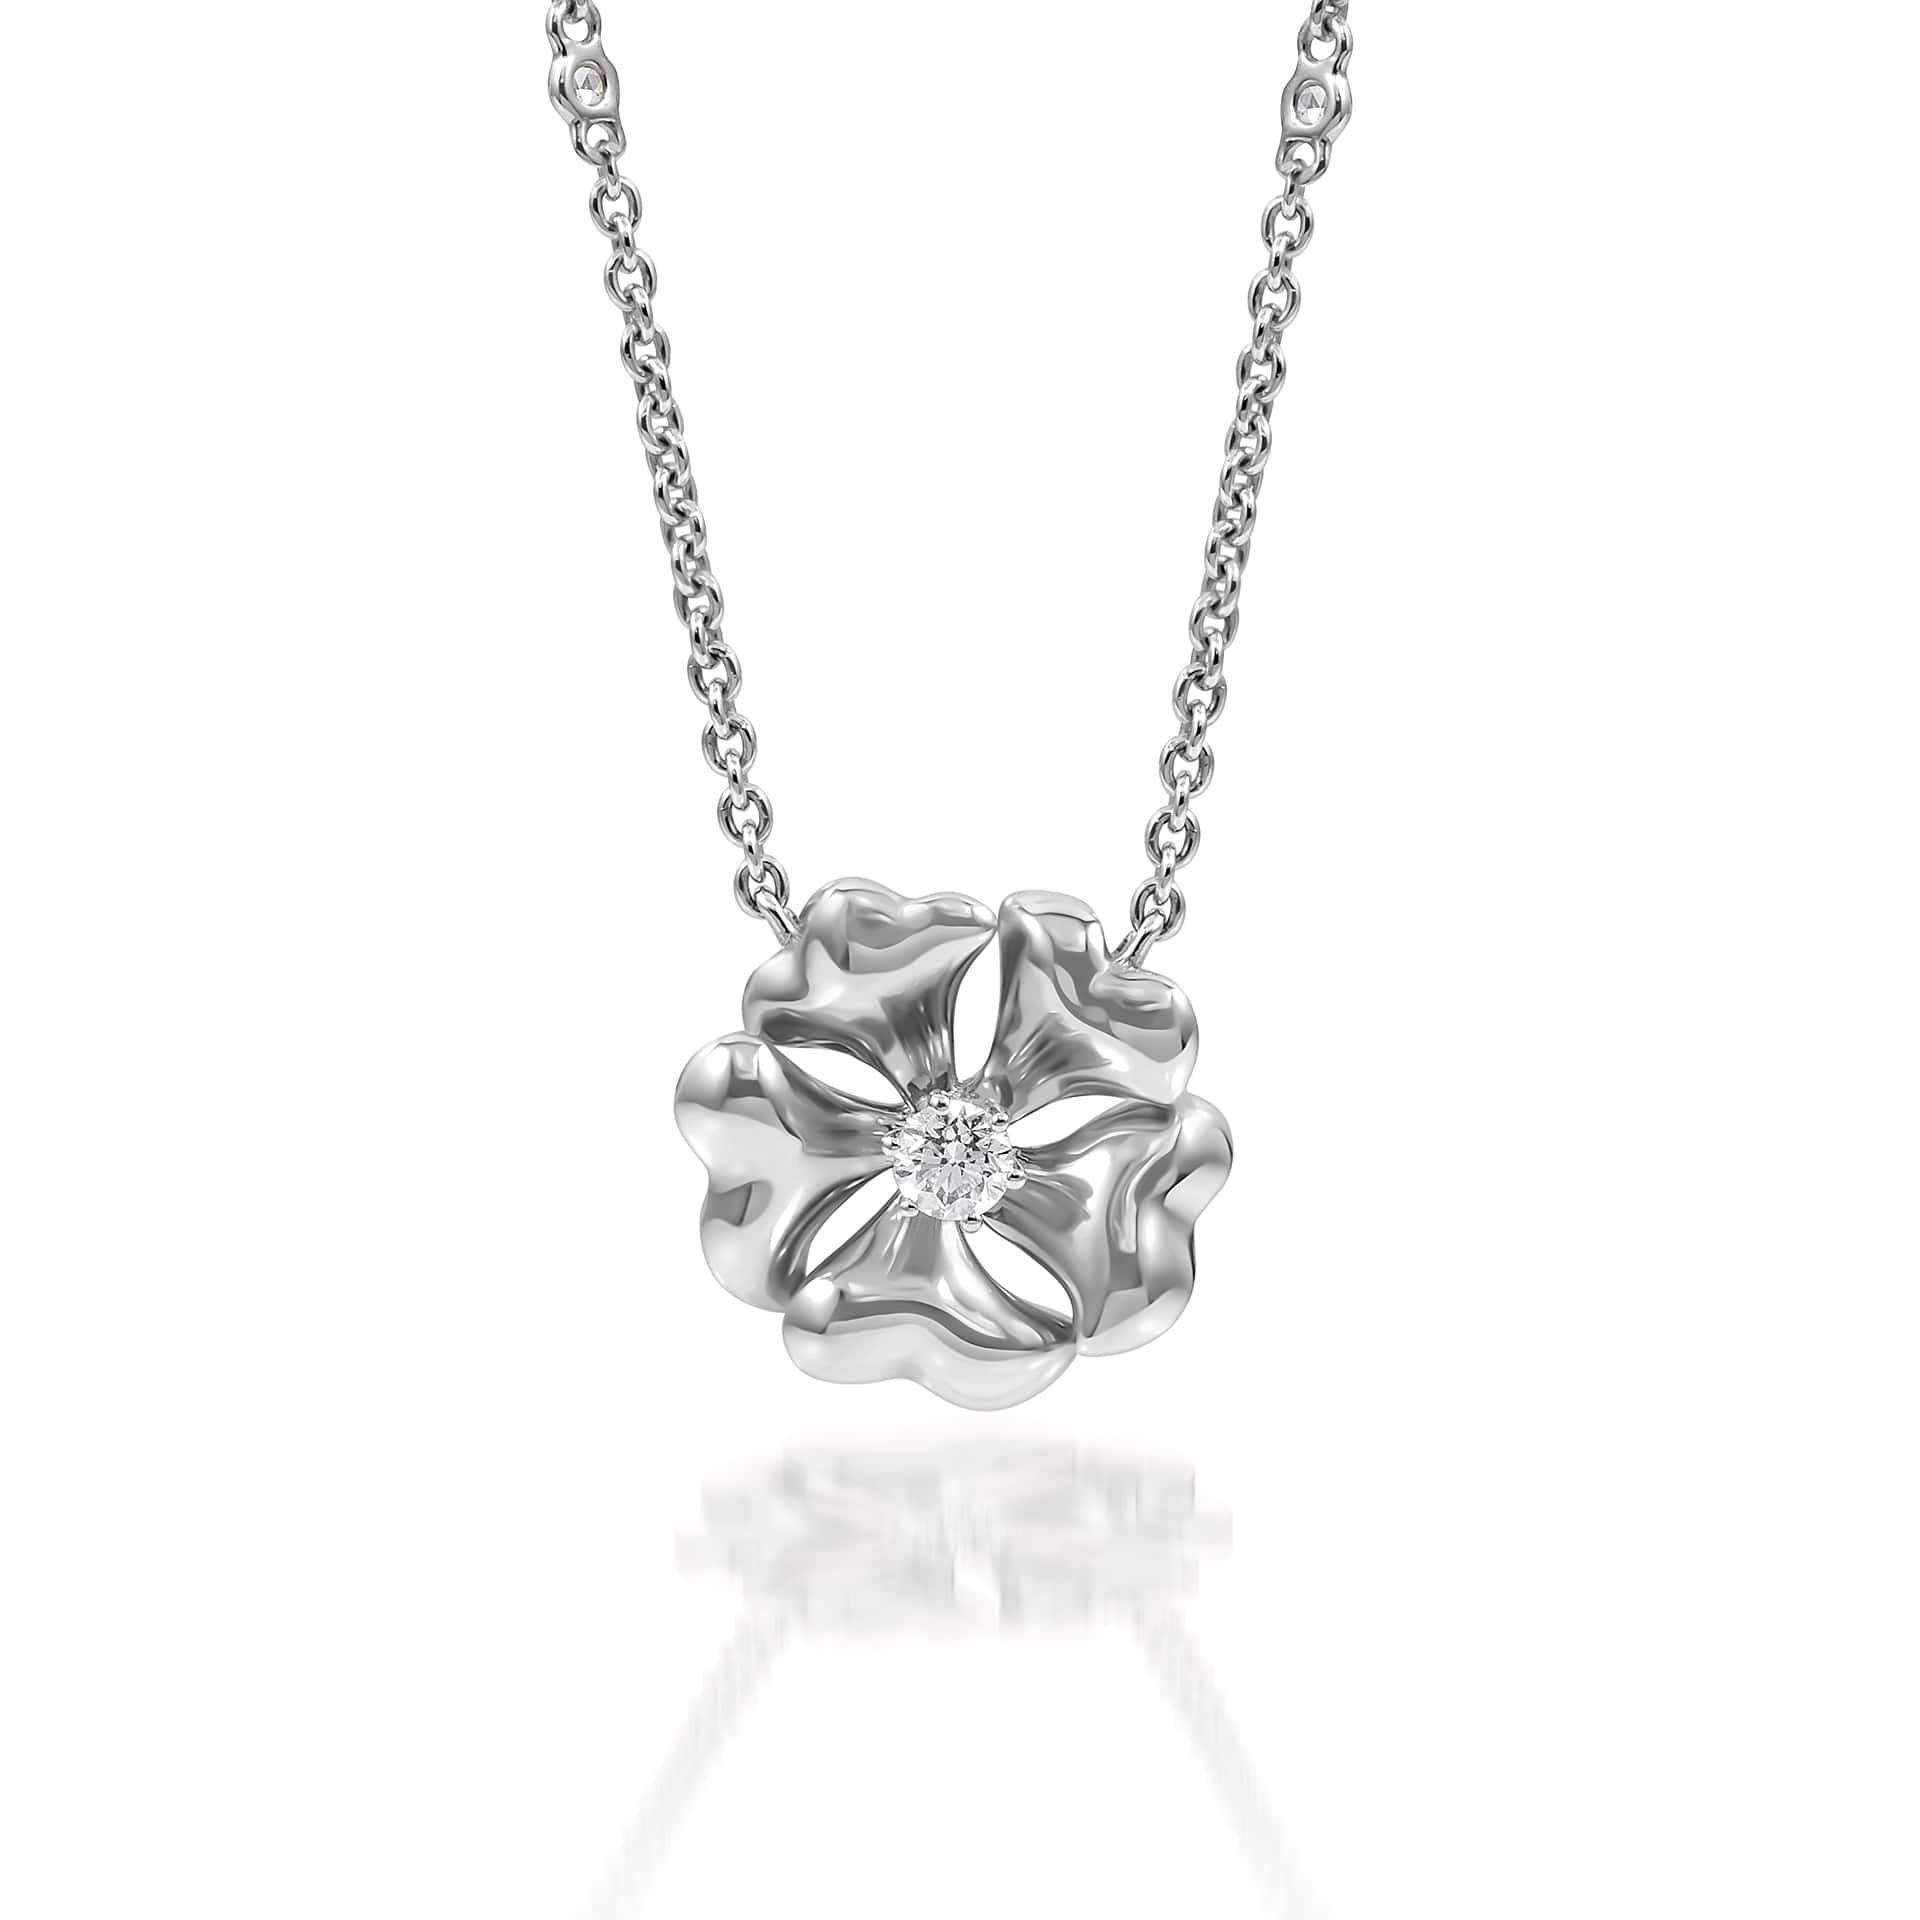 Bloom Gold and Diamond Flower Necklace in 18K White Gold

Inspired by the exquisite petals of the alpine cinquefoil flower, the Bloom collection combines the richness of diamonds and precious metals with the light versatility of this delicate,